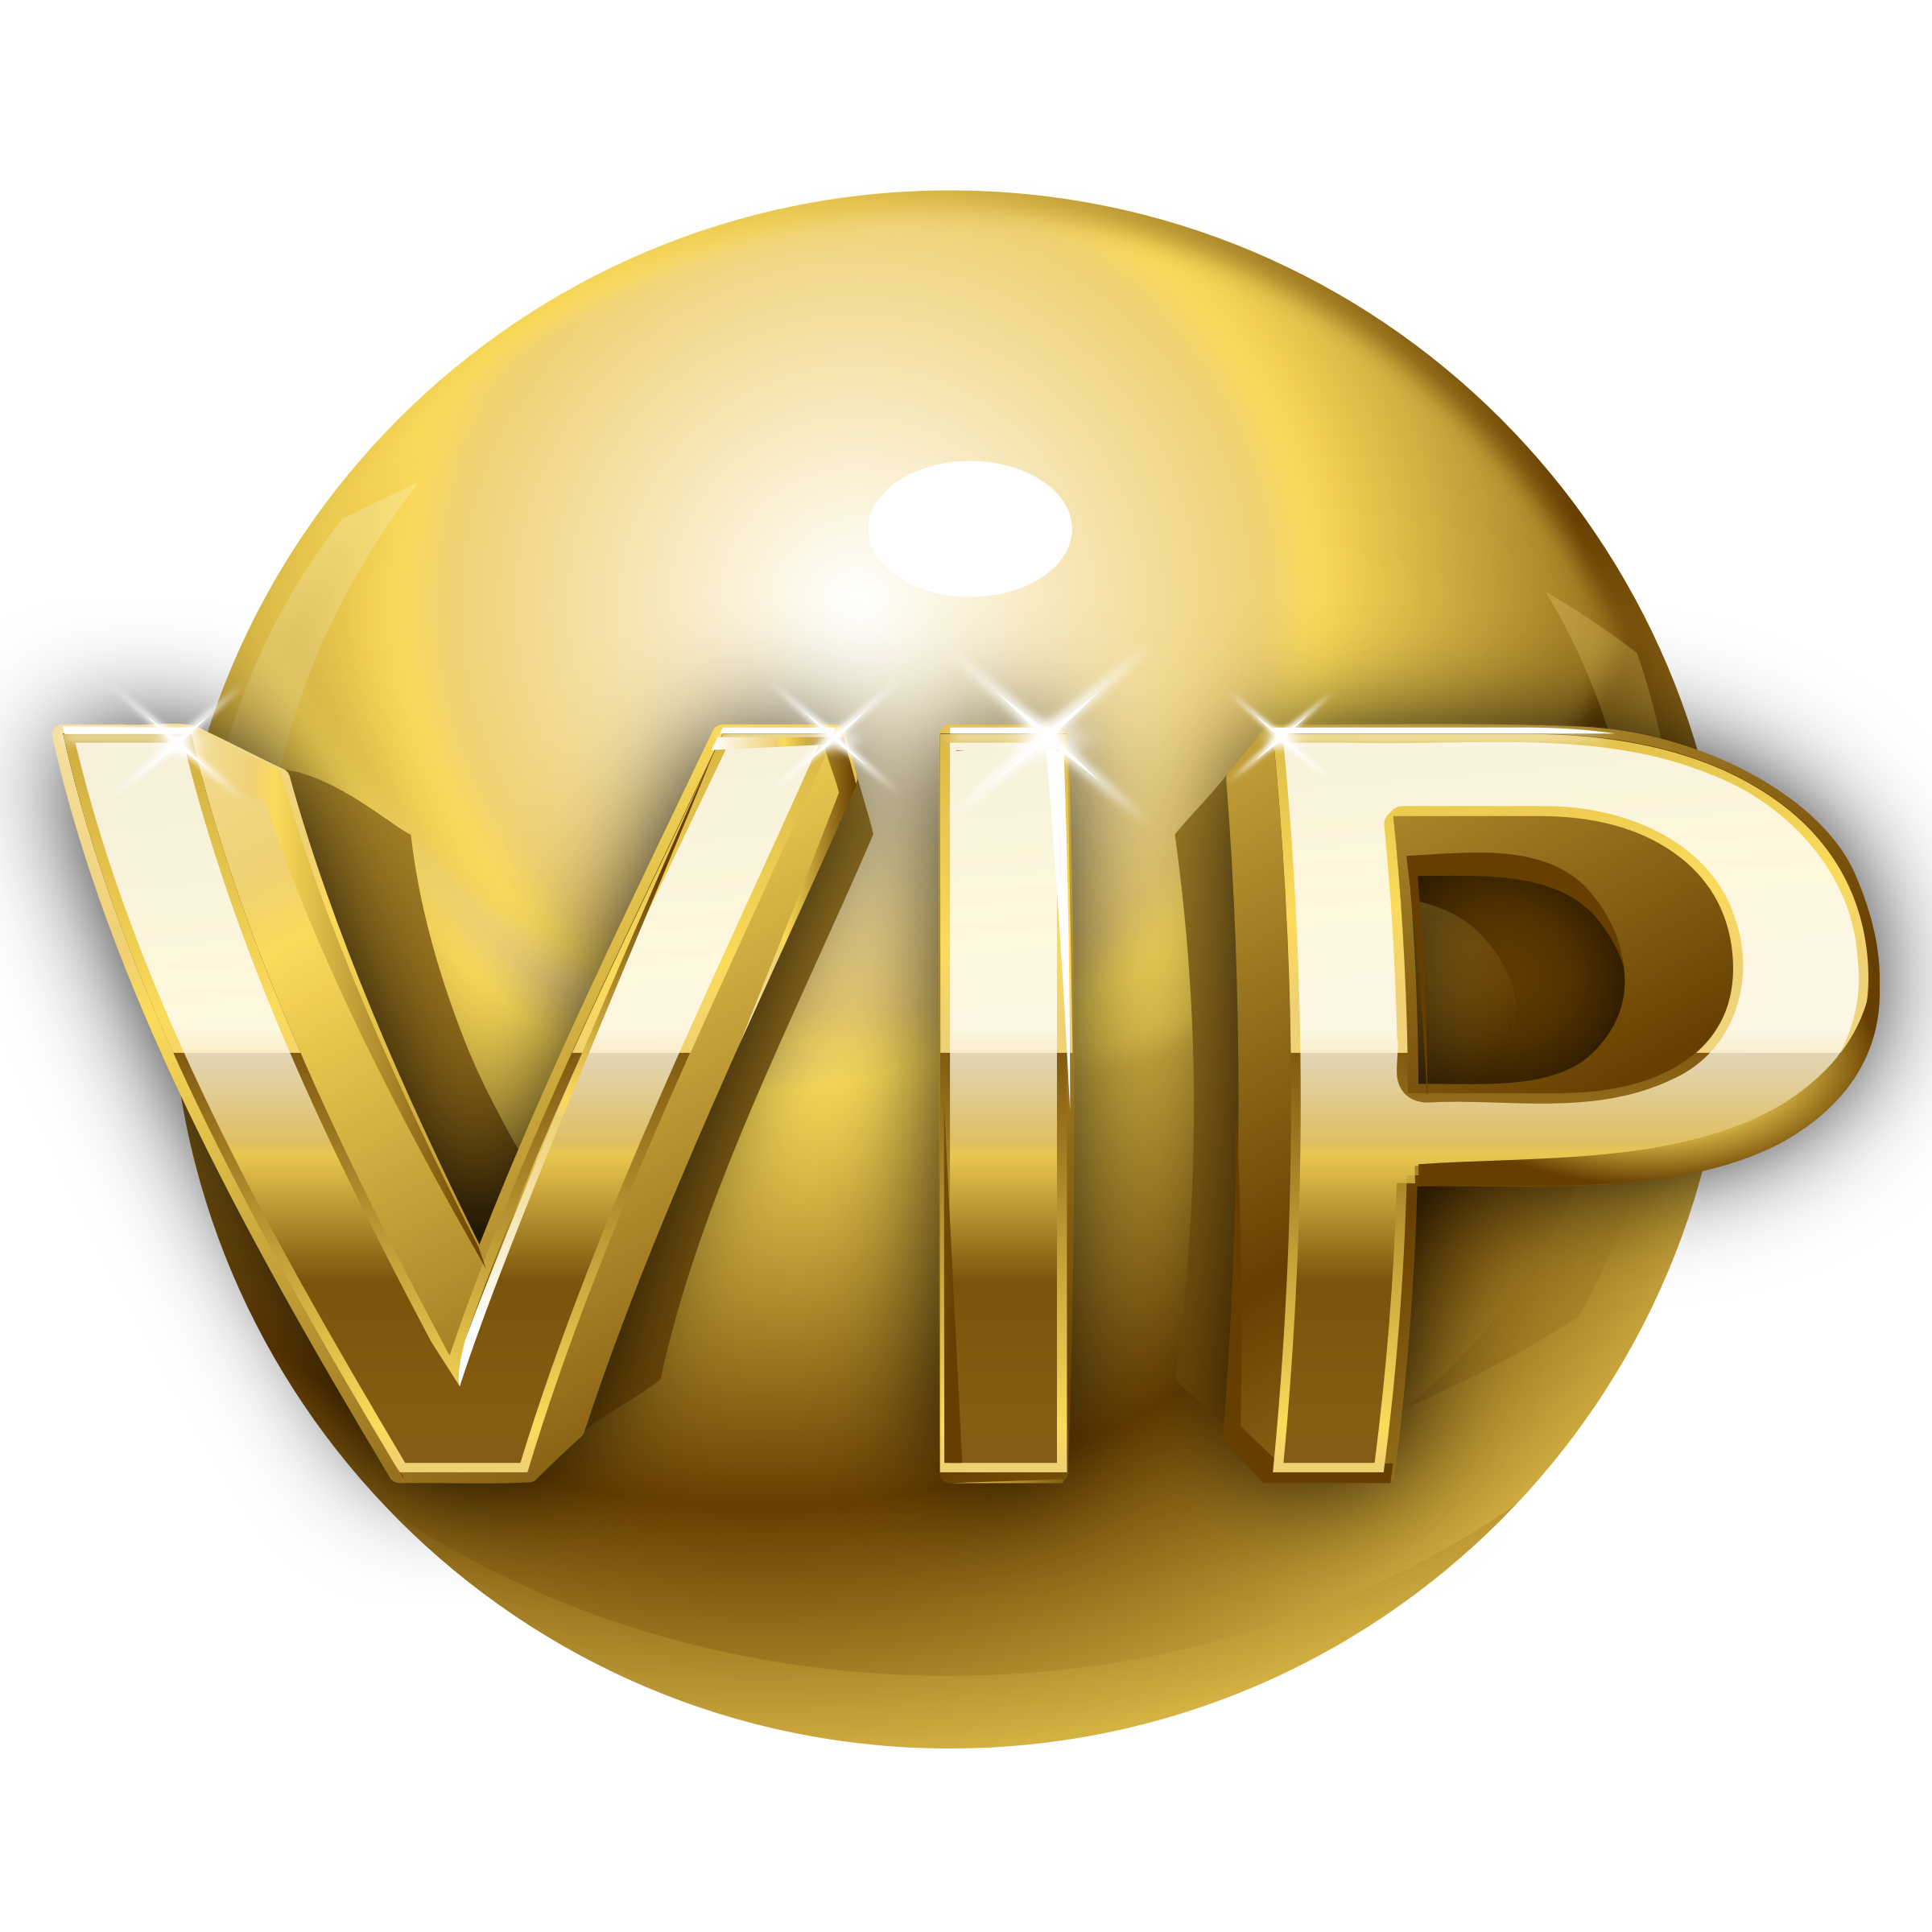 File:VIP clipart.png - Wikimedia Commons